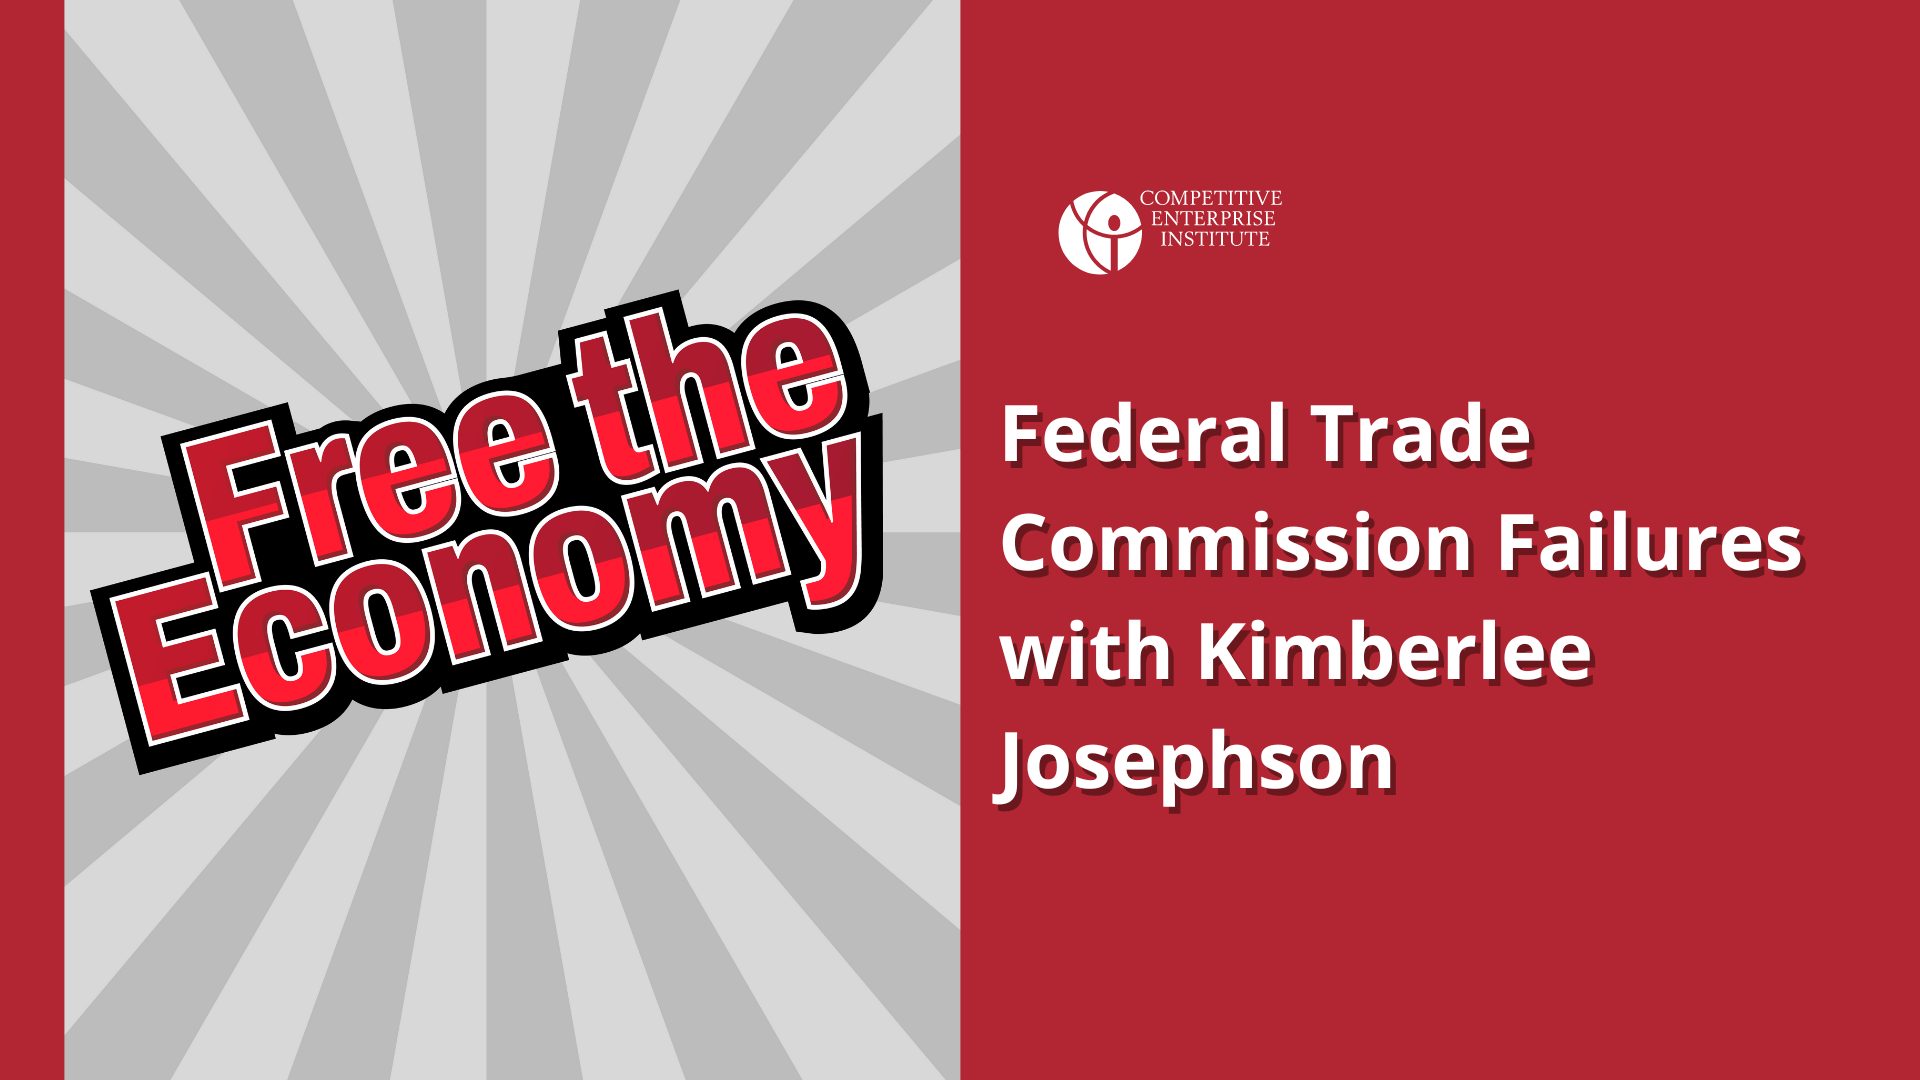 Federal Trade Commission Failures with Kimberlee Josephson